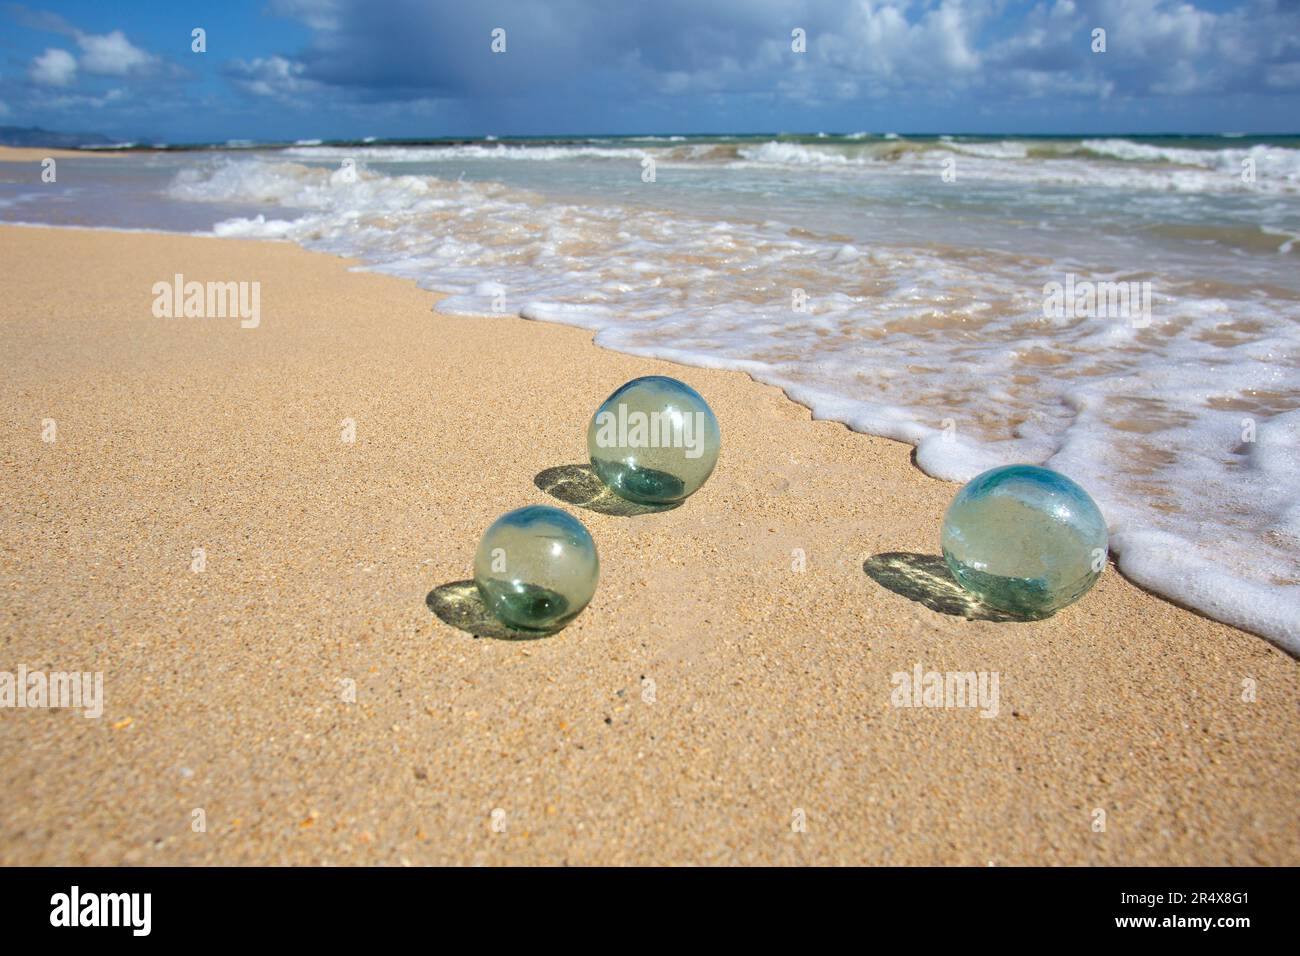 Japanese fishing balls (floats) on the beach, north shore of Maui